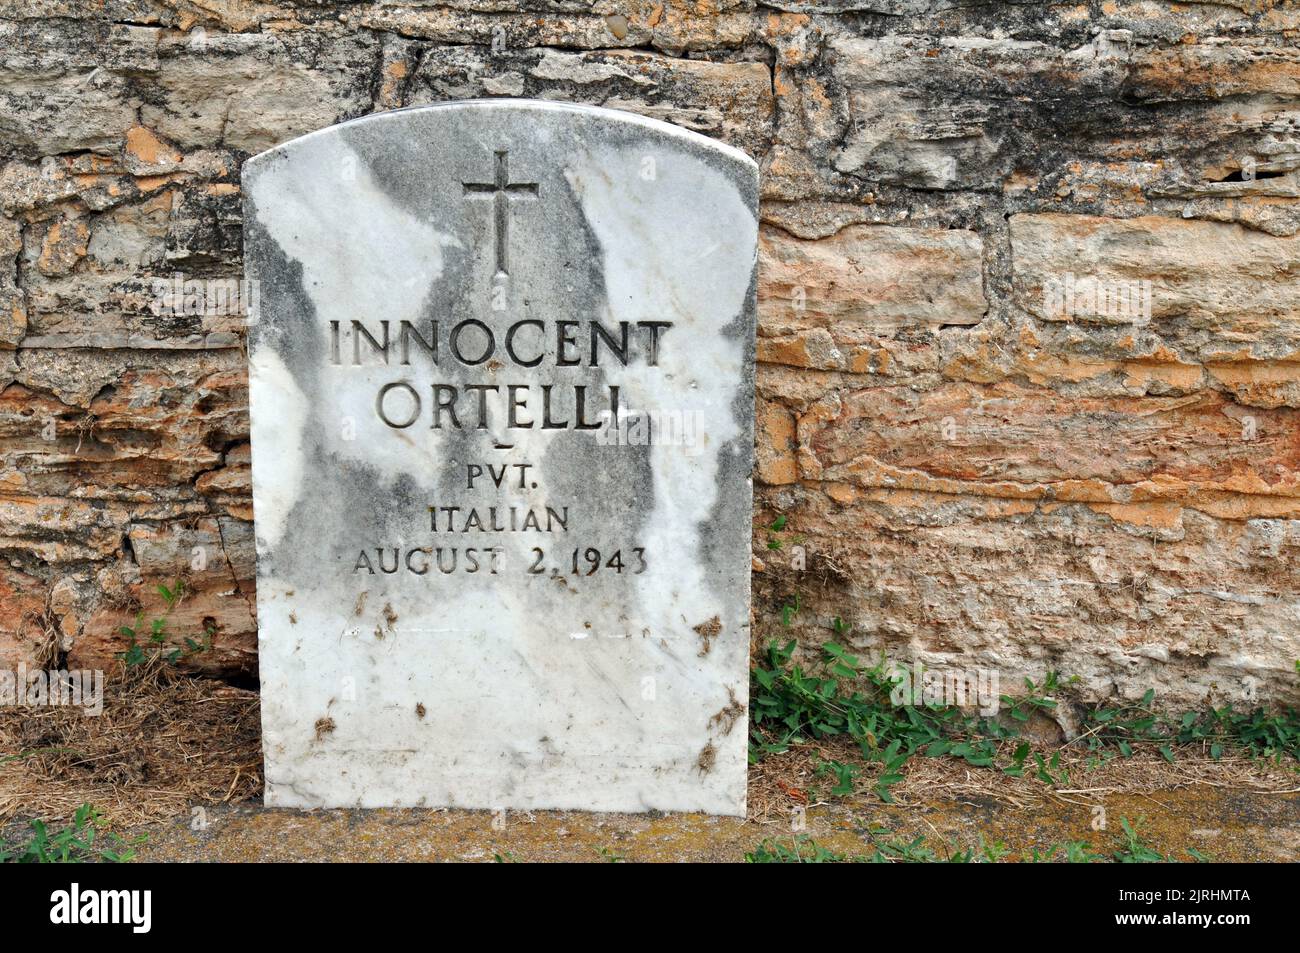 The grave of an Italian soldier in the historic cemetery at Fort Reno, Oklahoma. The fort served as a prisoner of war camp during World War II. Stock Photo